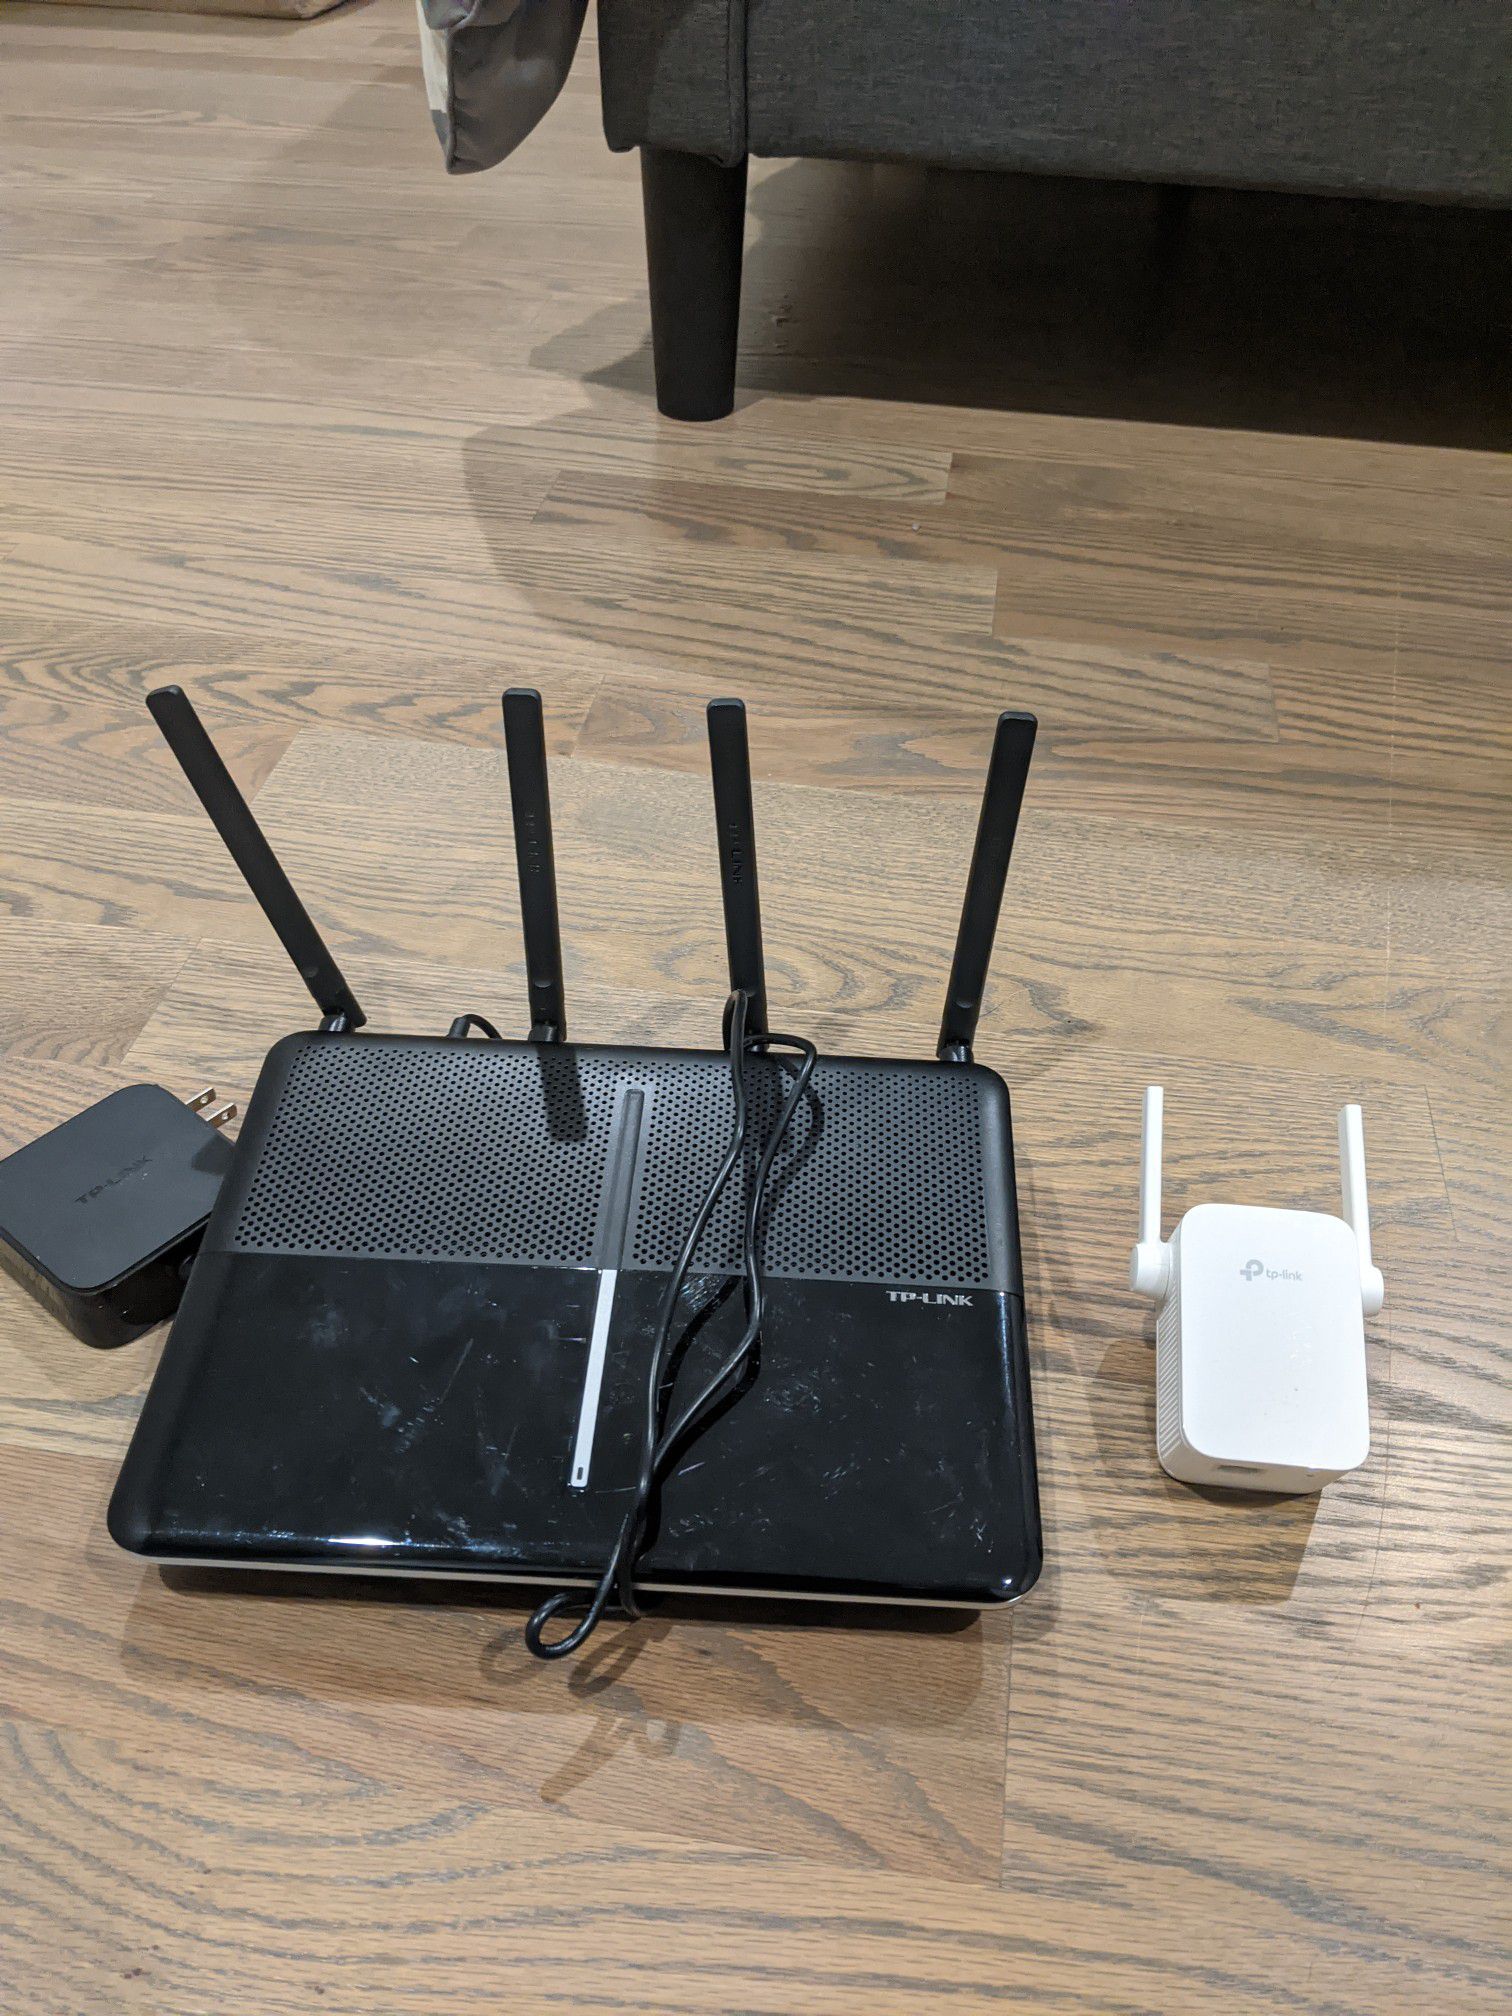 Tp link router ONLY